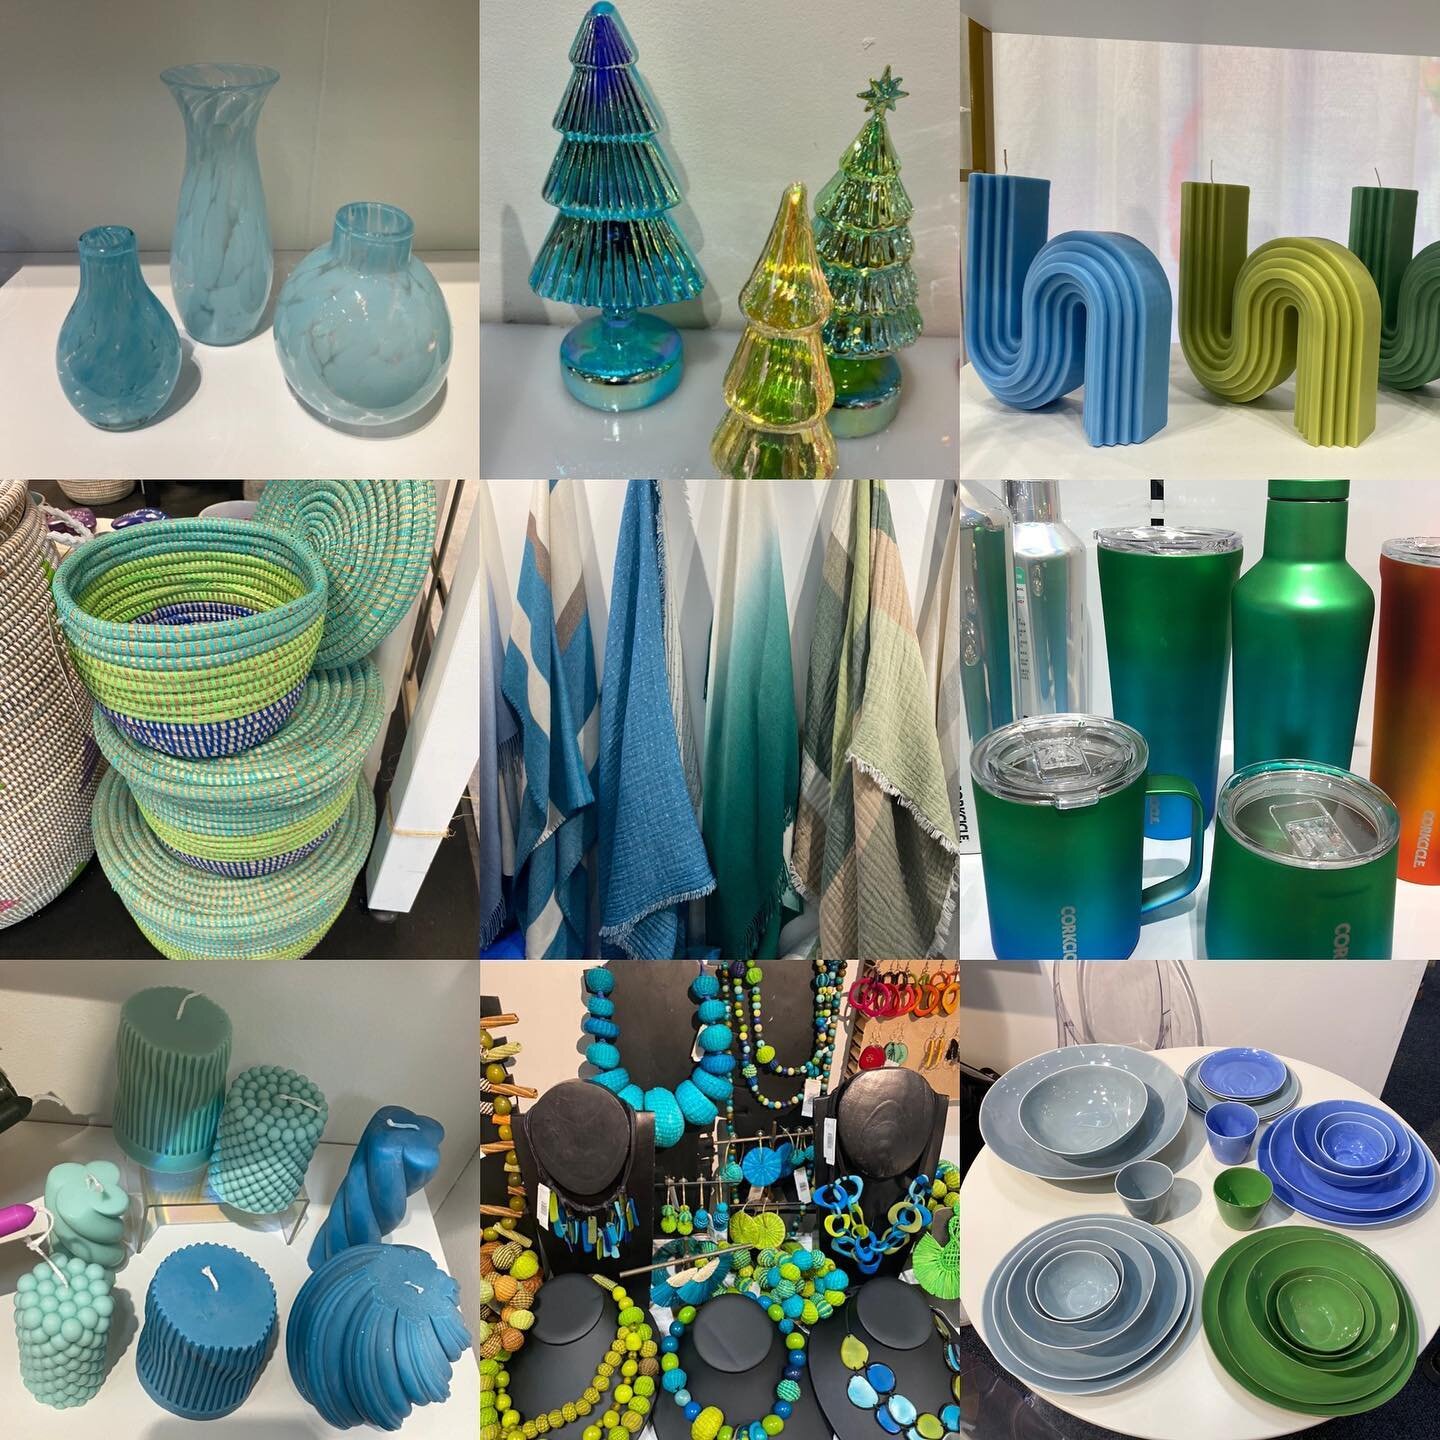 With a focus on the world&rsquo;s waters, our &ldquo;Oceanic&rdquo; trend was evident at both @shoppeobject and at @ny_now 
.
.
#whatsnext #onthemove #globaltrendambassador #color #colorpalette #oceanic #focusonwater #bluegreen #aquaticinspirations #